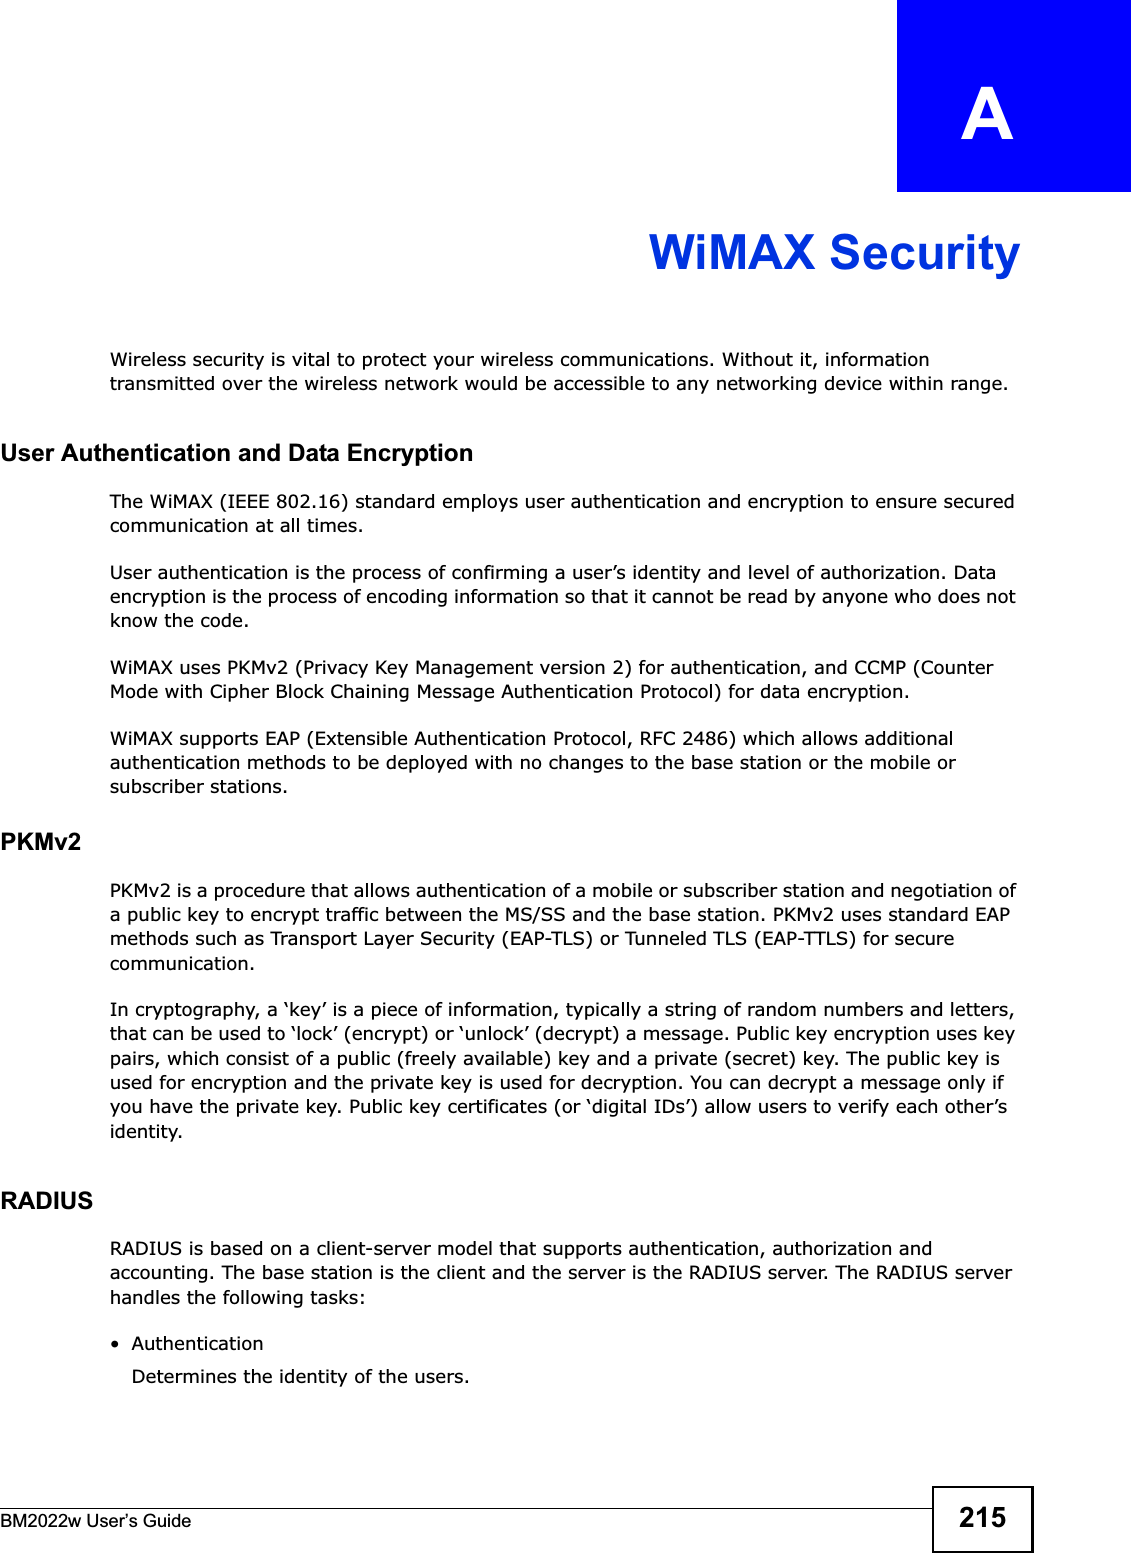 BM2022w User’s Guide 215APPENDIX   AWiMAX SecurityWireless security is vital to protect your wireless communications. Without it, information transmitted over the wireless network would be accessible to any networking device within range.User Authentication and Data EncryptionThe WiMAX (IEEE 802.16) standard employs user authentication and encryption to ensure secured communication at all times.User authentication is the process of confirming a user’s identity and level of authorization. Data encryption is the process of encoding information so that it cannot be read by anyone who does not know the code. WiMAX uses PKMv2 (Privacy Key Management version 2) for authentication, and CCMP (Counter Mode with Cipher Block Chaining Message Authentication Protocol) for data encryption. WiMAX supports EAP (Extensible Authentication Protocol, RFC 2486) which allows additional authentication methods to be deployed with no changes to the base station or the mobile or subscriber stations.PKMv2PKMv2 is a procedure that allows authentication of a mobile or subscriber station and negotiation of a public key to encrypt traffic between the MS/SS and the base station. PKMv2 uses standard EAP methods such as Transport Layer Security (EAP-TLS) or Tunneled TLS (EAP-TTLS) for secure communication.In cryptography, a ‘key’ is a piece of information, typically a string of random numbers and letters, that can be used to ‘lock’ (encrypt) or ‘unlock’ (decrypt) a message. Public key encryption uses key pairs, which consist of a public (freely available) key and a private (secret) key. The public key is used for encryption and the private key is used for decryption. You can decrypt a message only if you have the private key. Public key certificates (or ‘digital IDs’) allow users to verify each other’s identity. RADIUSRADIUS is based on a client-server model that supports authentication, authorization and accounting. The base station is the client and the server is the RADIUS server. The RADIUS server handles the following tasks:• Authentication Determines the identity of the users.